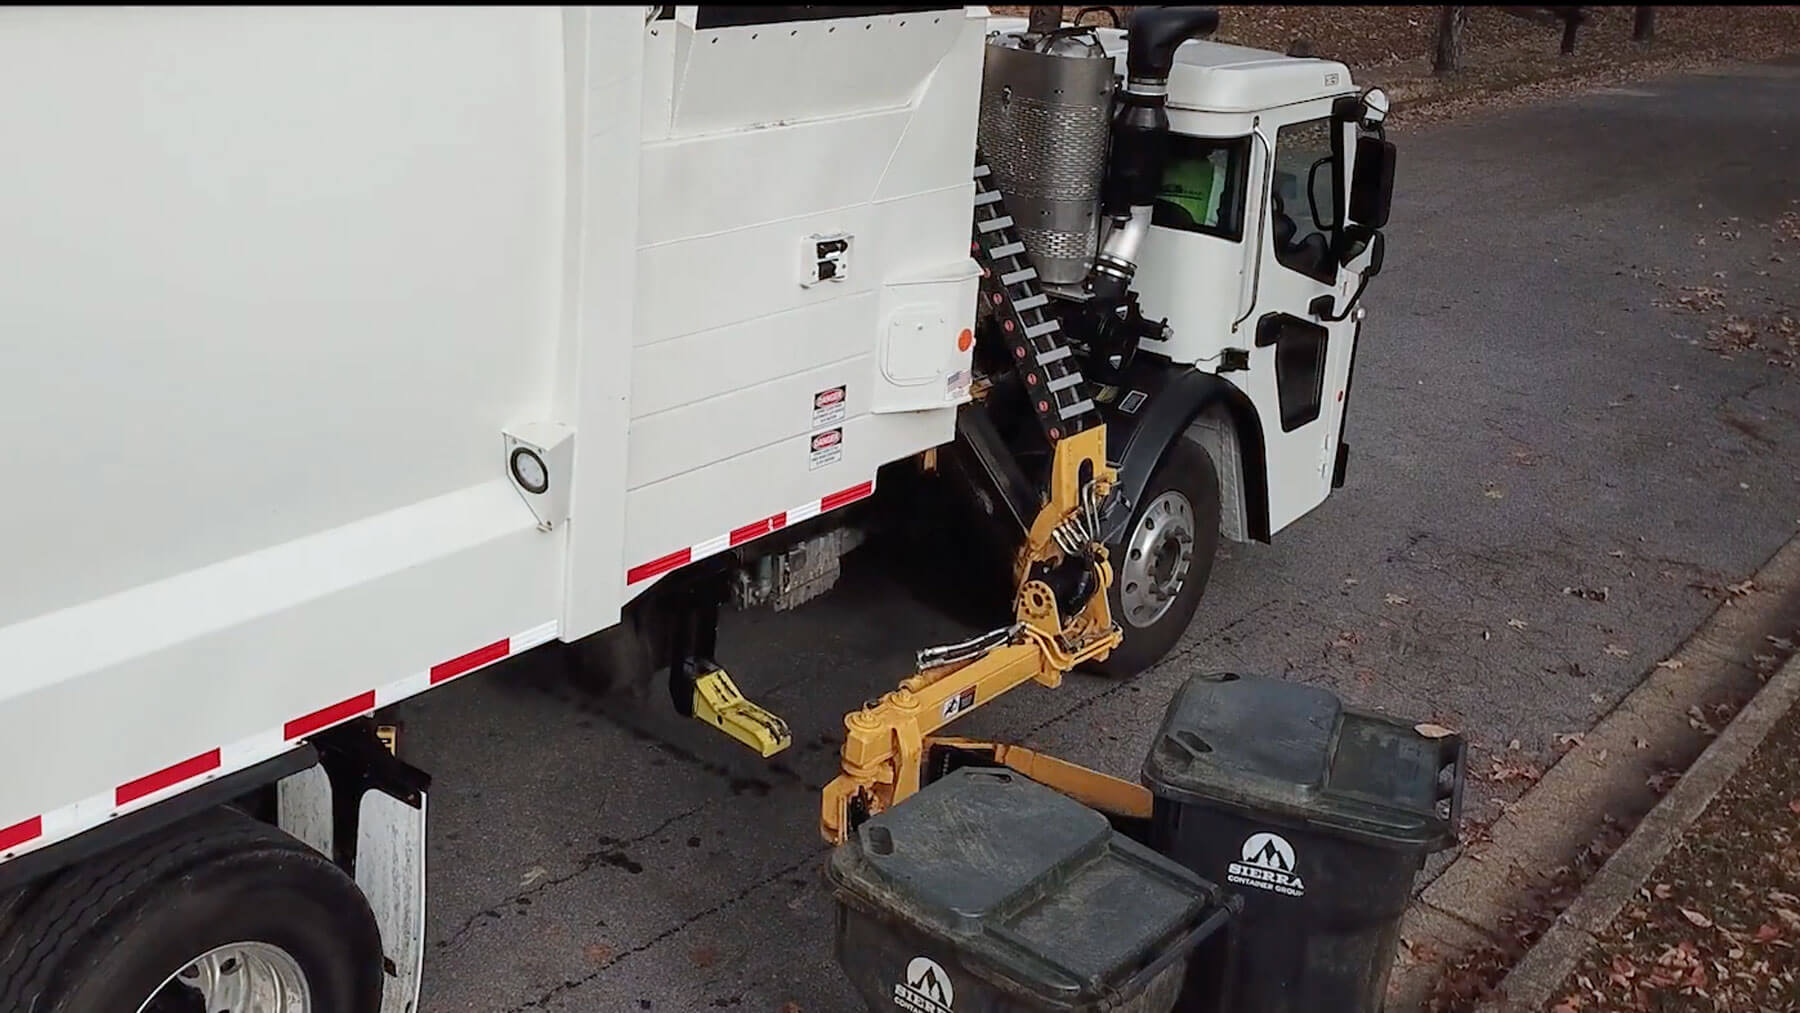 Command SST automated side loader garbage truck video